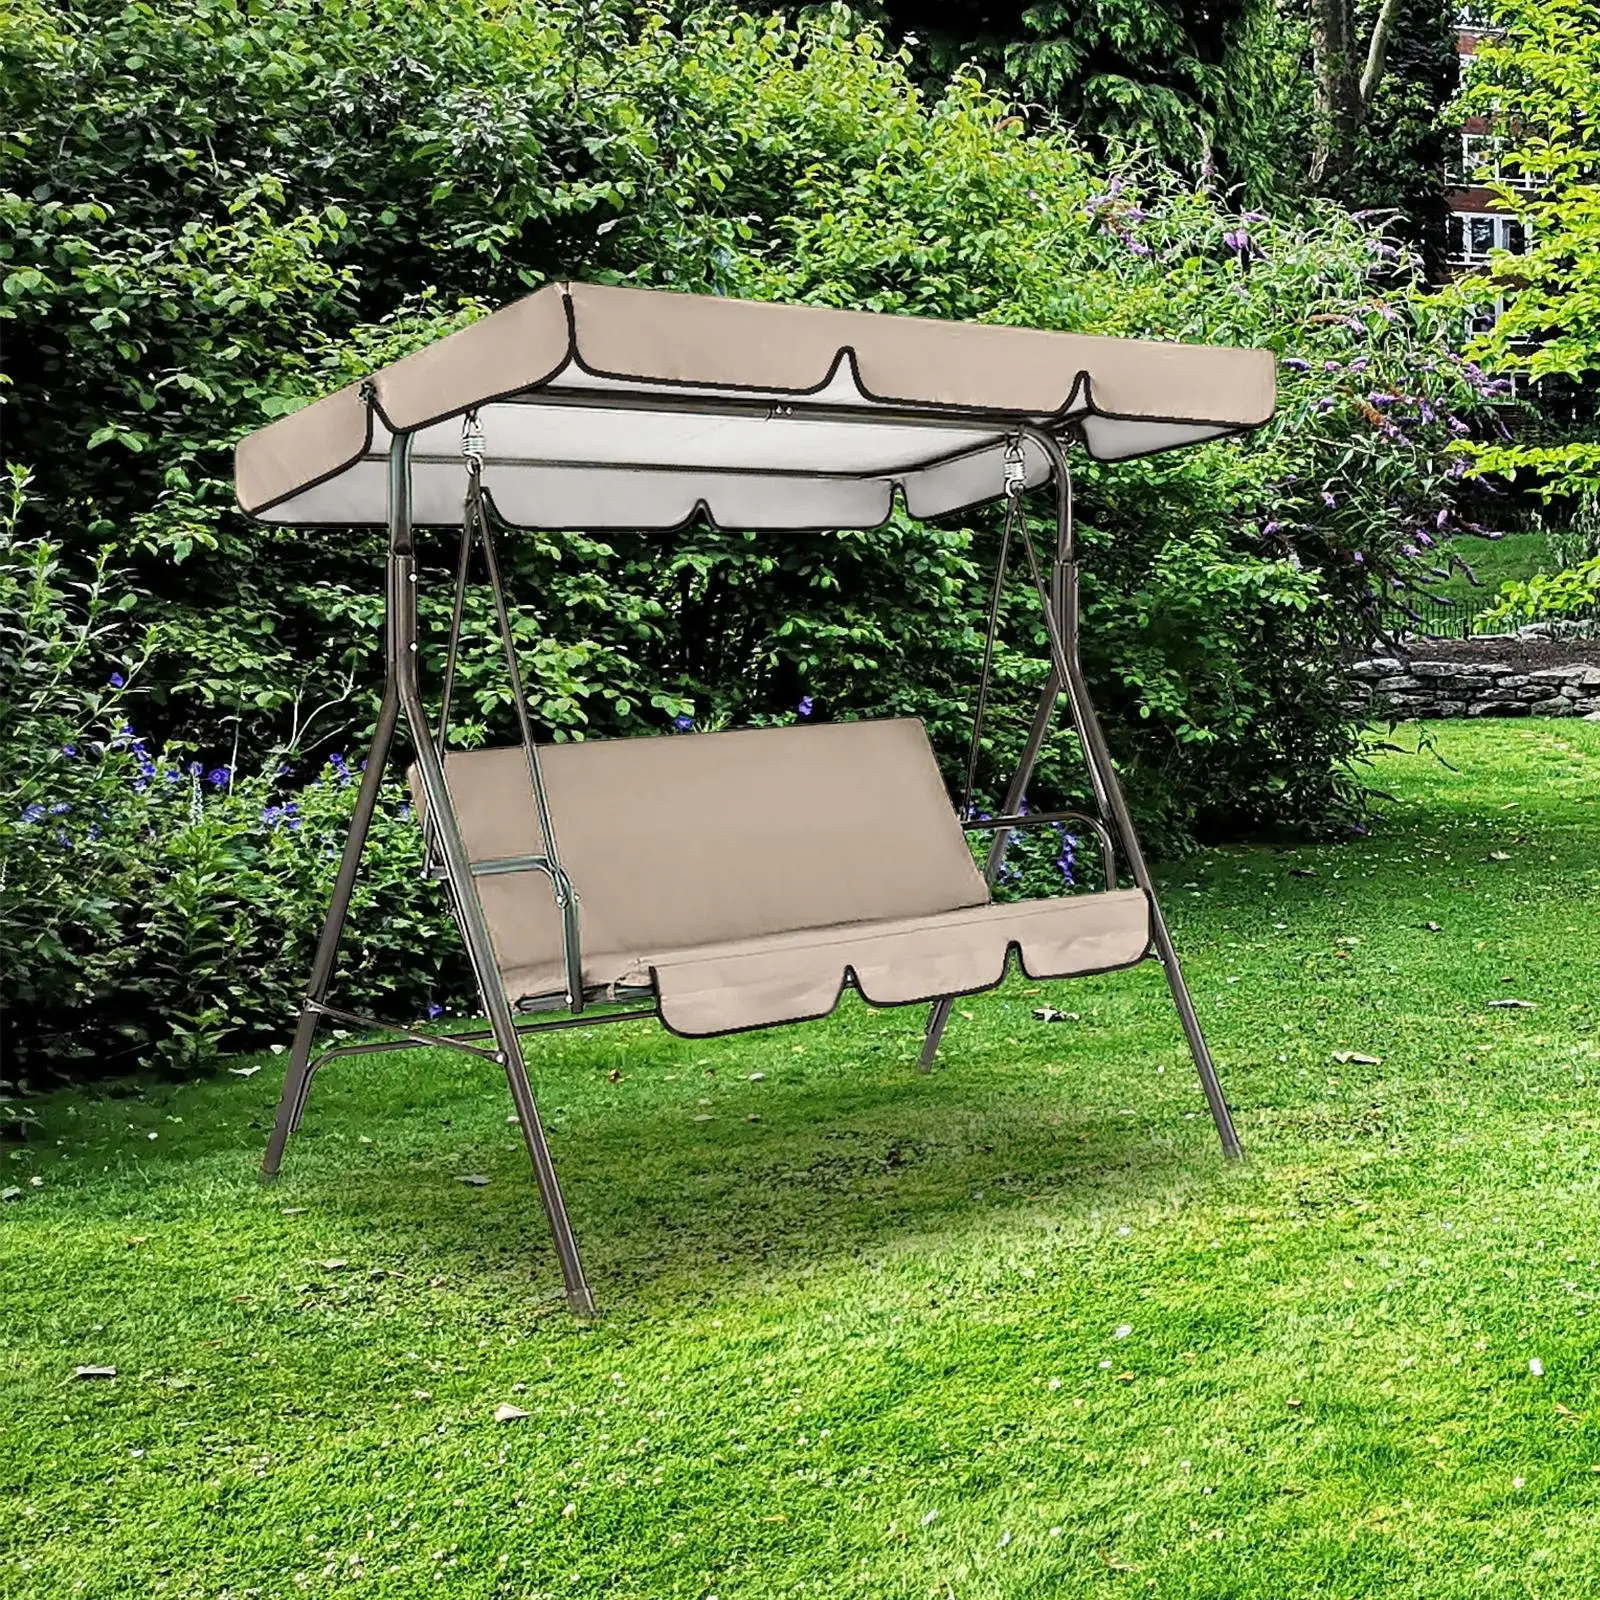 Patio Swing Canopy Swing Chair Dust Covers Dustproof Durable Garden Swing Chair Cover for Porch Seat Garden Outdoor